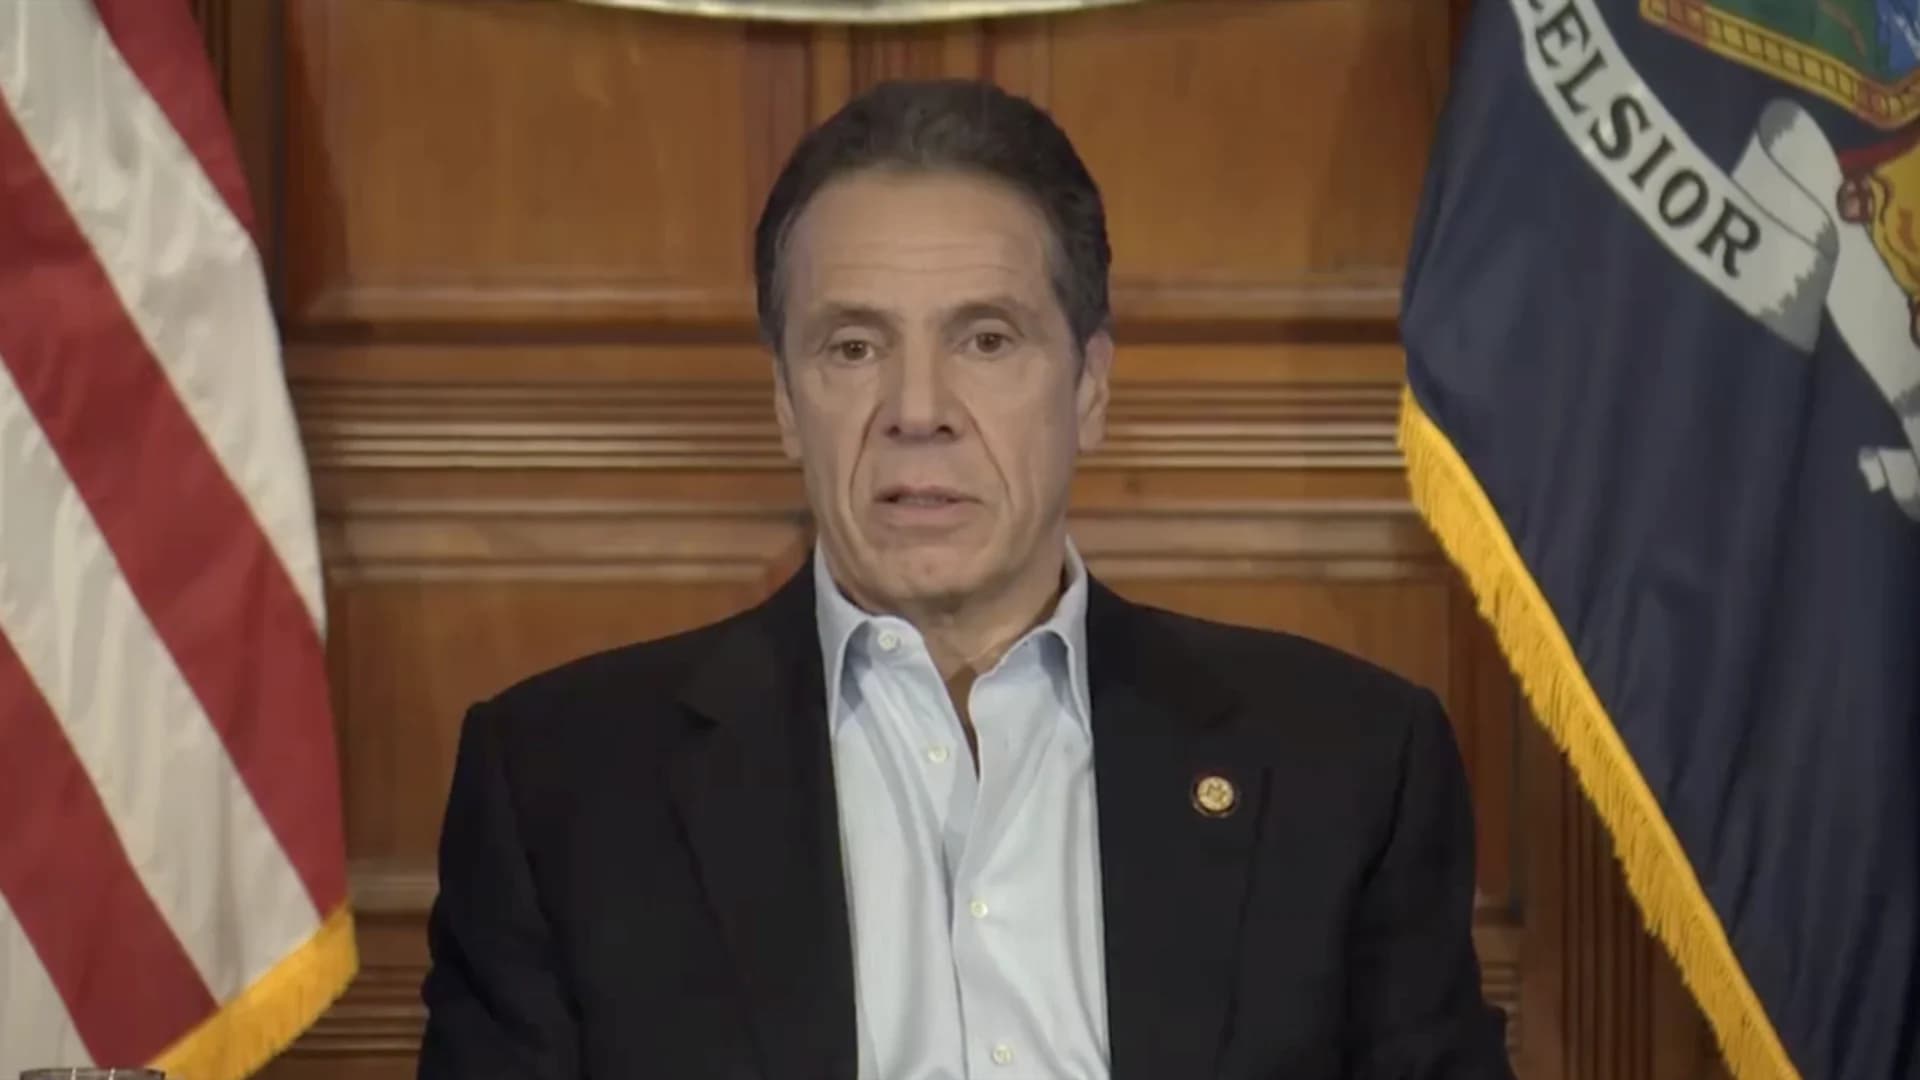 Gov. Cuomo reports 540 new COVID deaths, but recent hospitalizations have declined